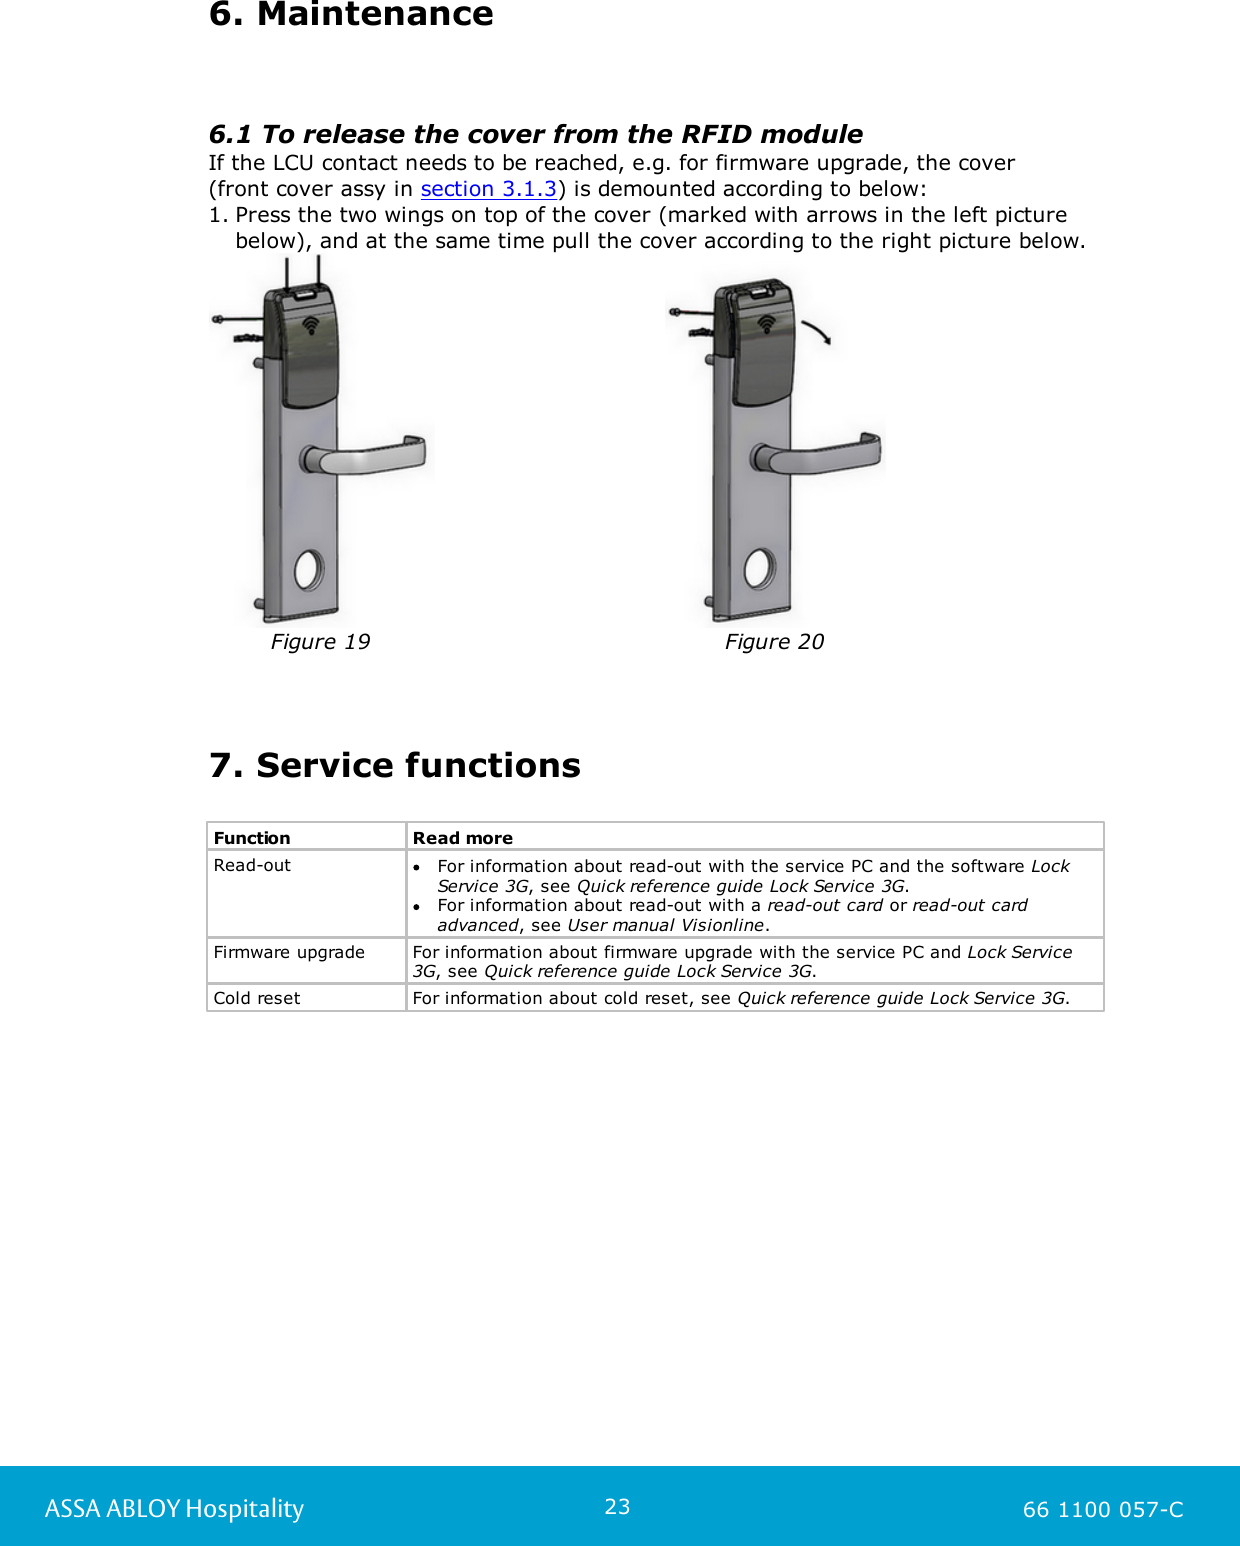 23ASSA ABLOY Hospitality 66 1100 057-C6. Maintenance6.1 To release the cover from the RFID moduleIf the LCU contact needs to be reached, e.g. for firmware upgrade, the cover(front cover assy in section 3.1.3) is demounted according to below:1. Press the two wings on top of the cover (marked with arrows in the left picturebelow), and at the same time pull the cover according to the right picture below.Figure 19Figure 207. Service functionsFunctionRead moreRead-outFor information about read-out with the service PC and the software LockService 3G, see Quick reference guide Lock Service 3G. For information about read-out with a read-out card or read-out cardadvanced, see User manual Visionline. Firmware upgradeFor information about firmware upgrade with the service PC and Lock Service3G, see Quick reference guide Lock Service 3G. Cold resetFor information about cold reset, see Quick reference guide Lock Service 3G.  